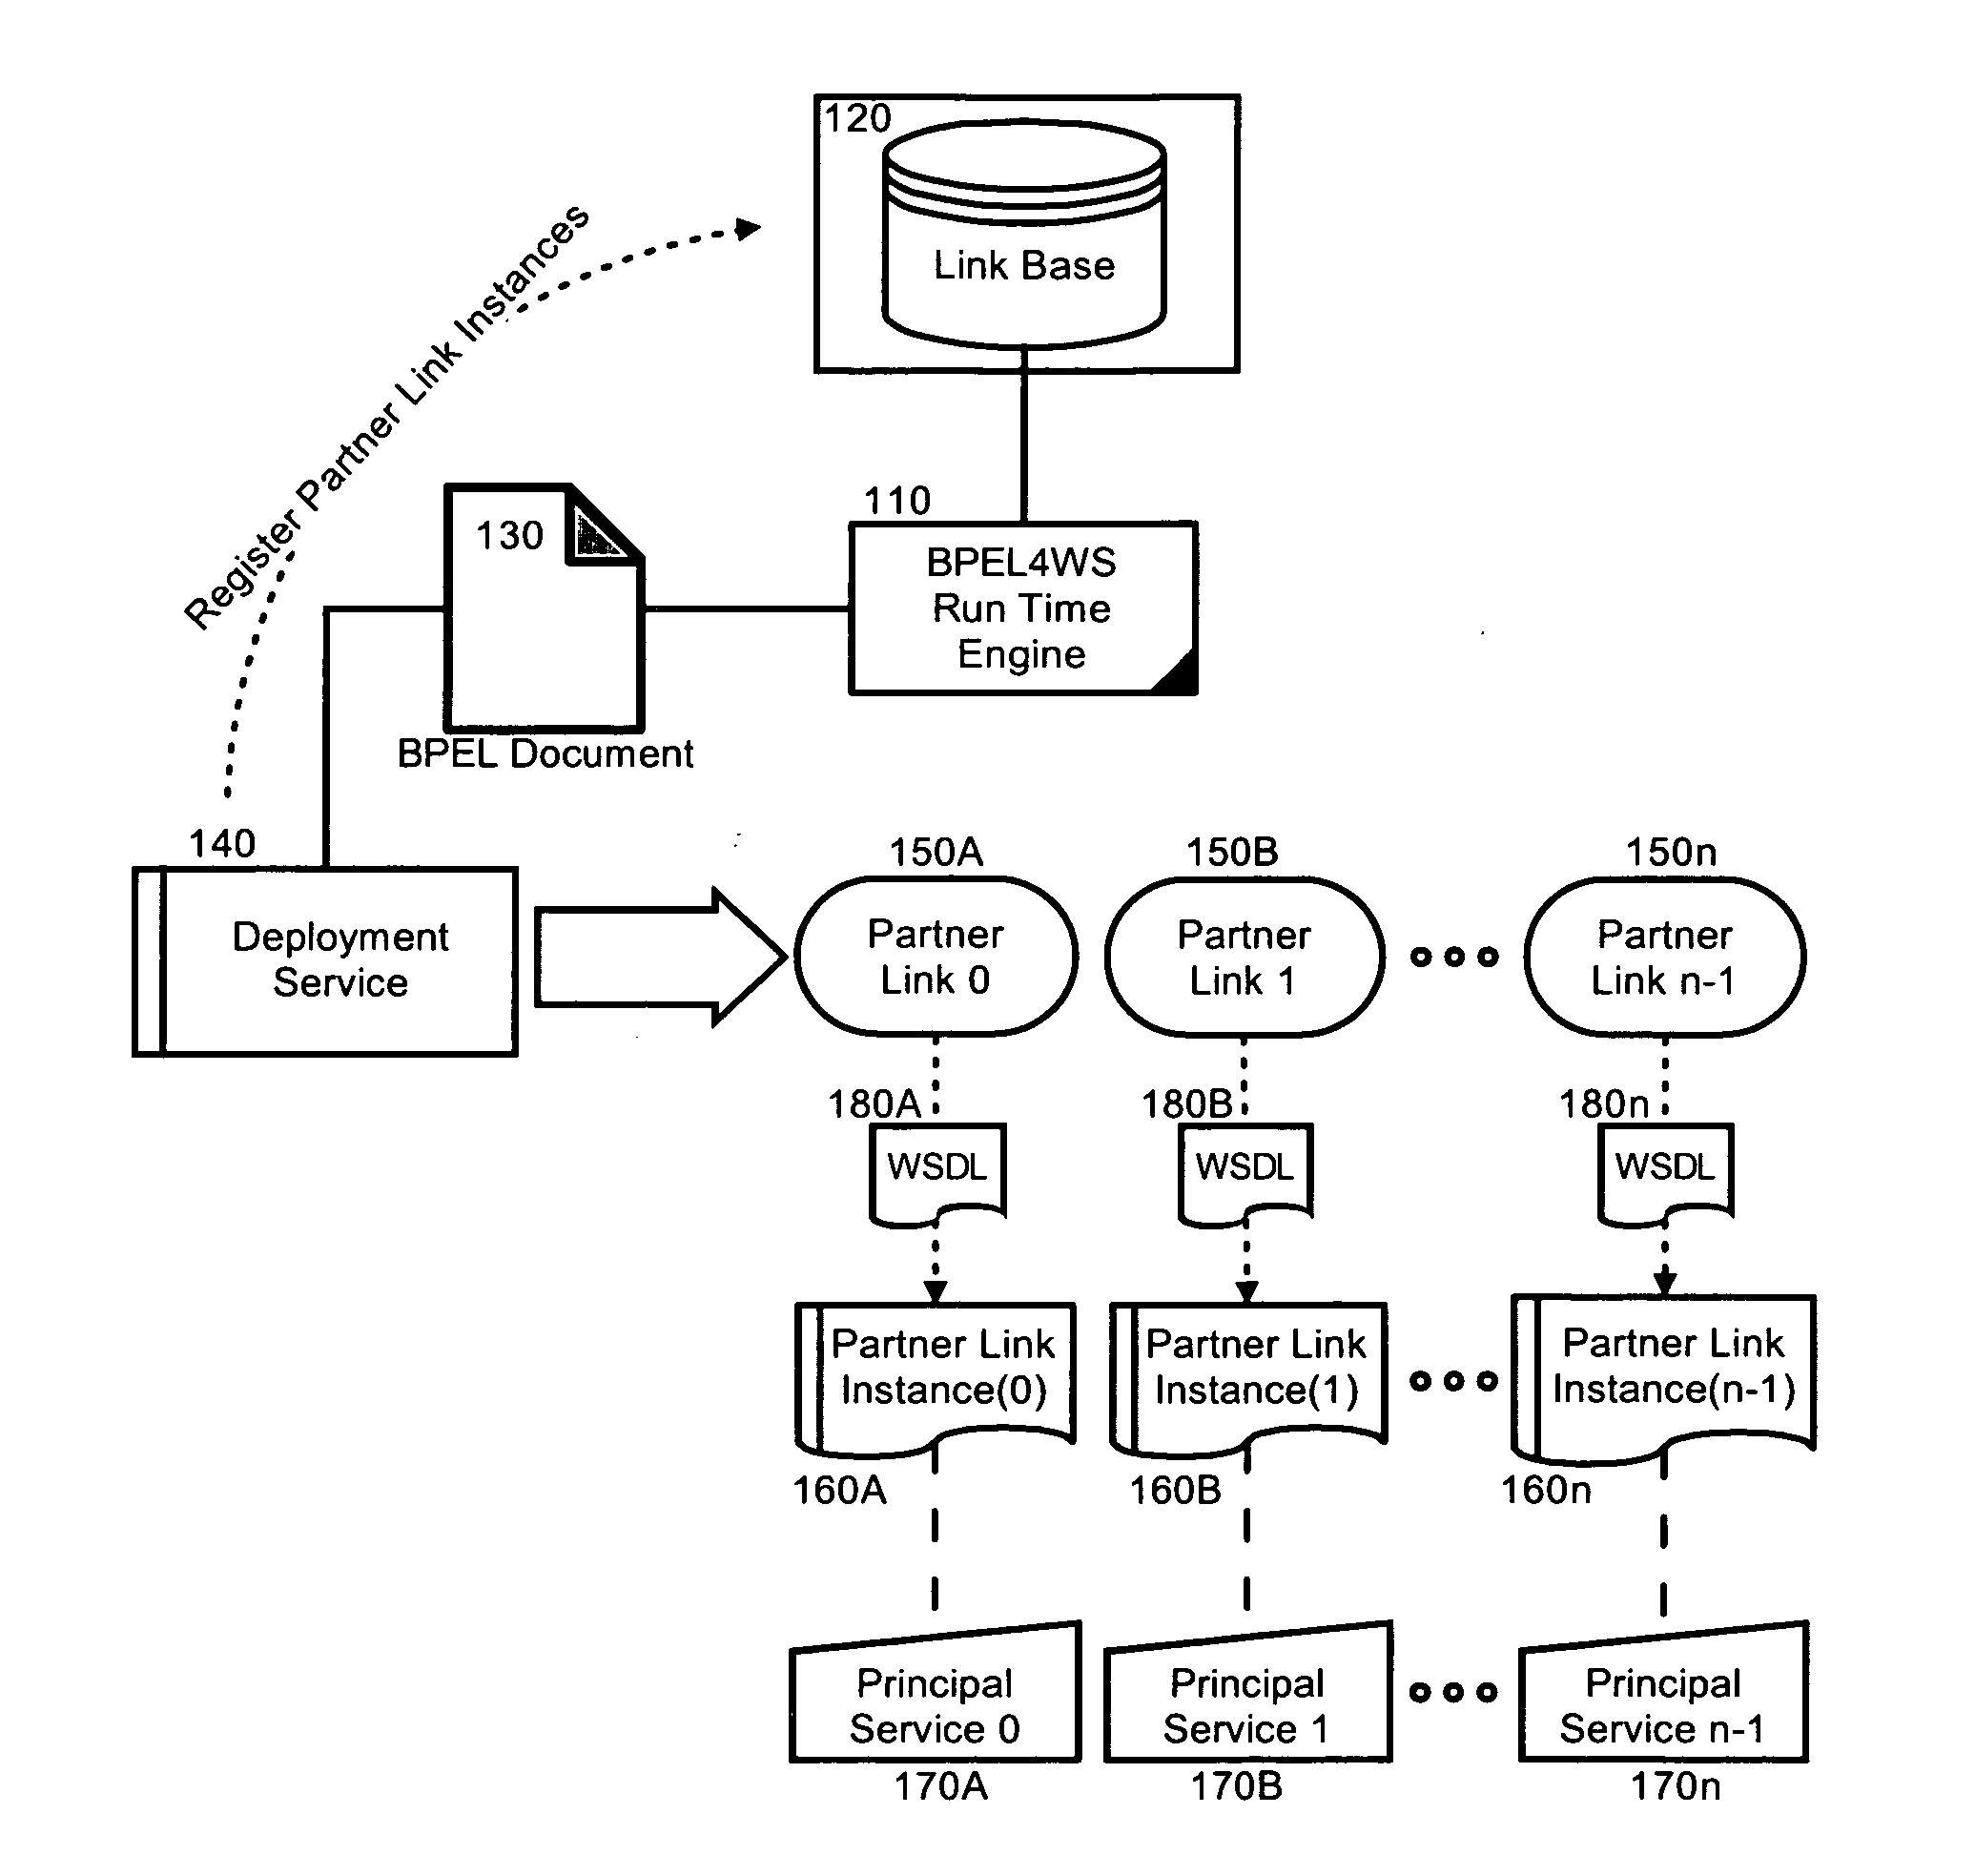 Dynamic binding of principal services in a cross-enterprise business process management system